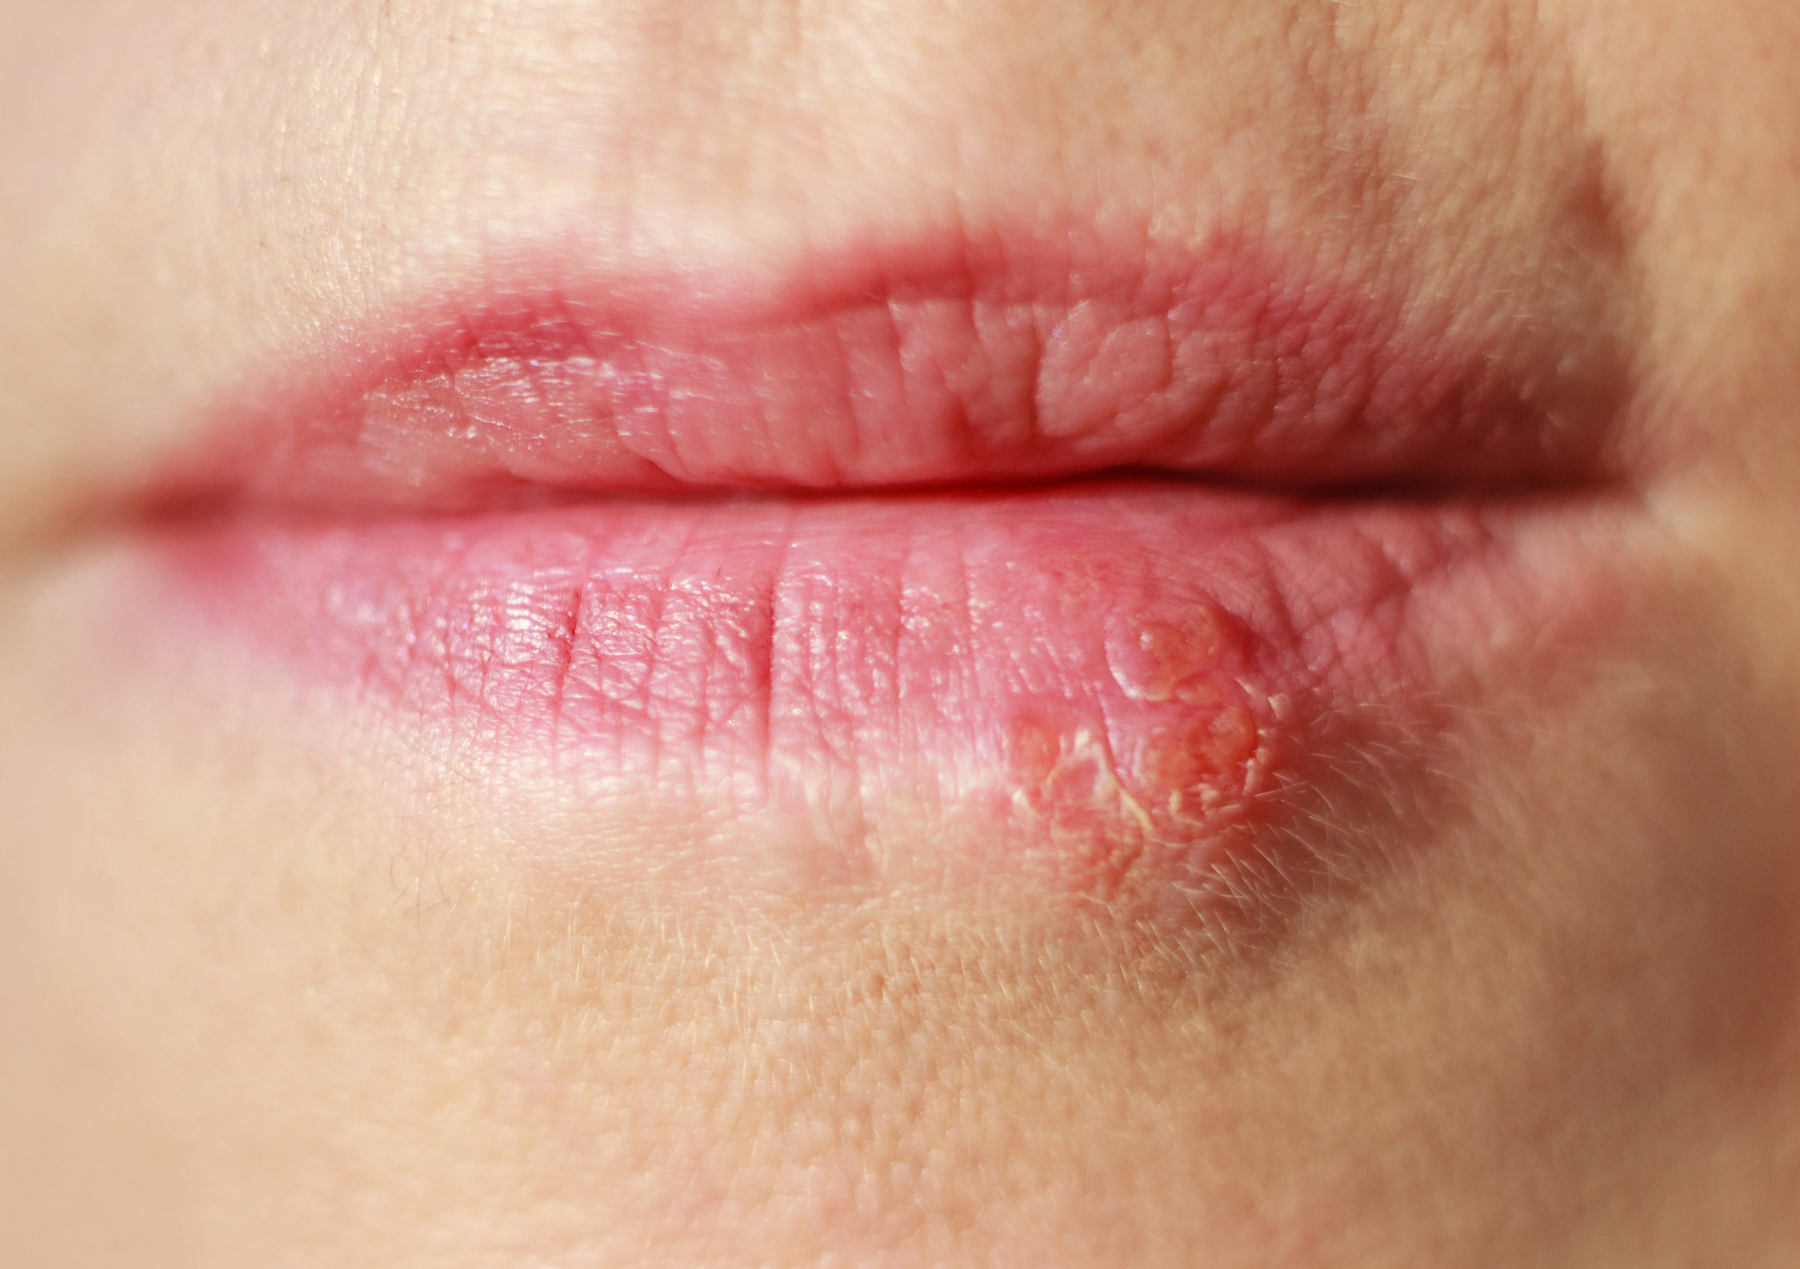 How To Help Prevent Cold Sores?